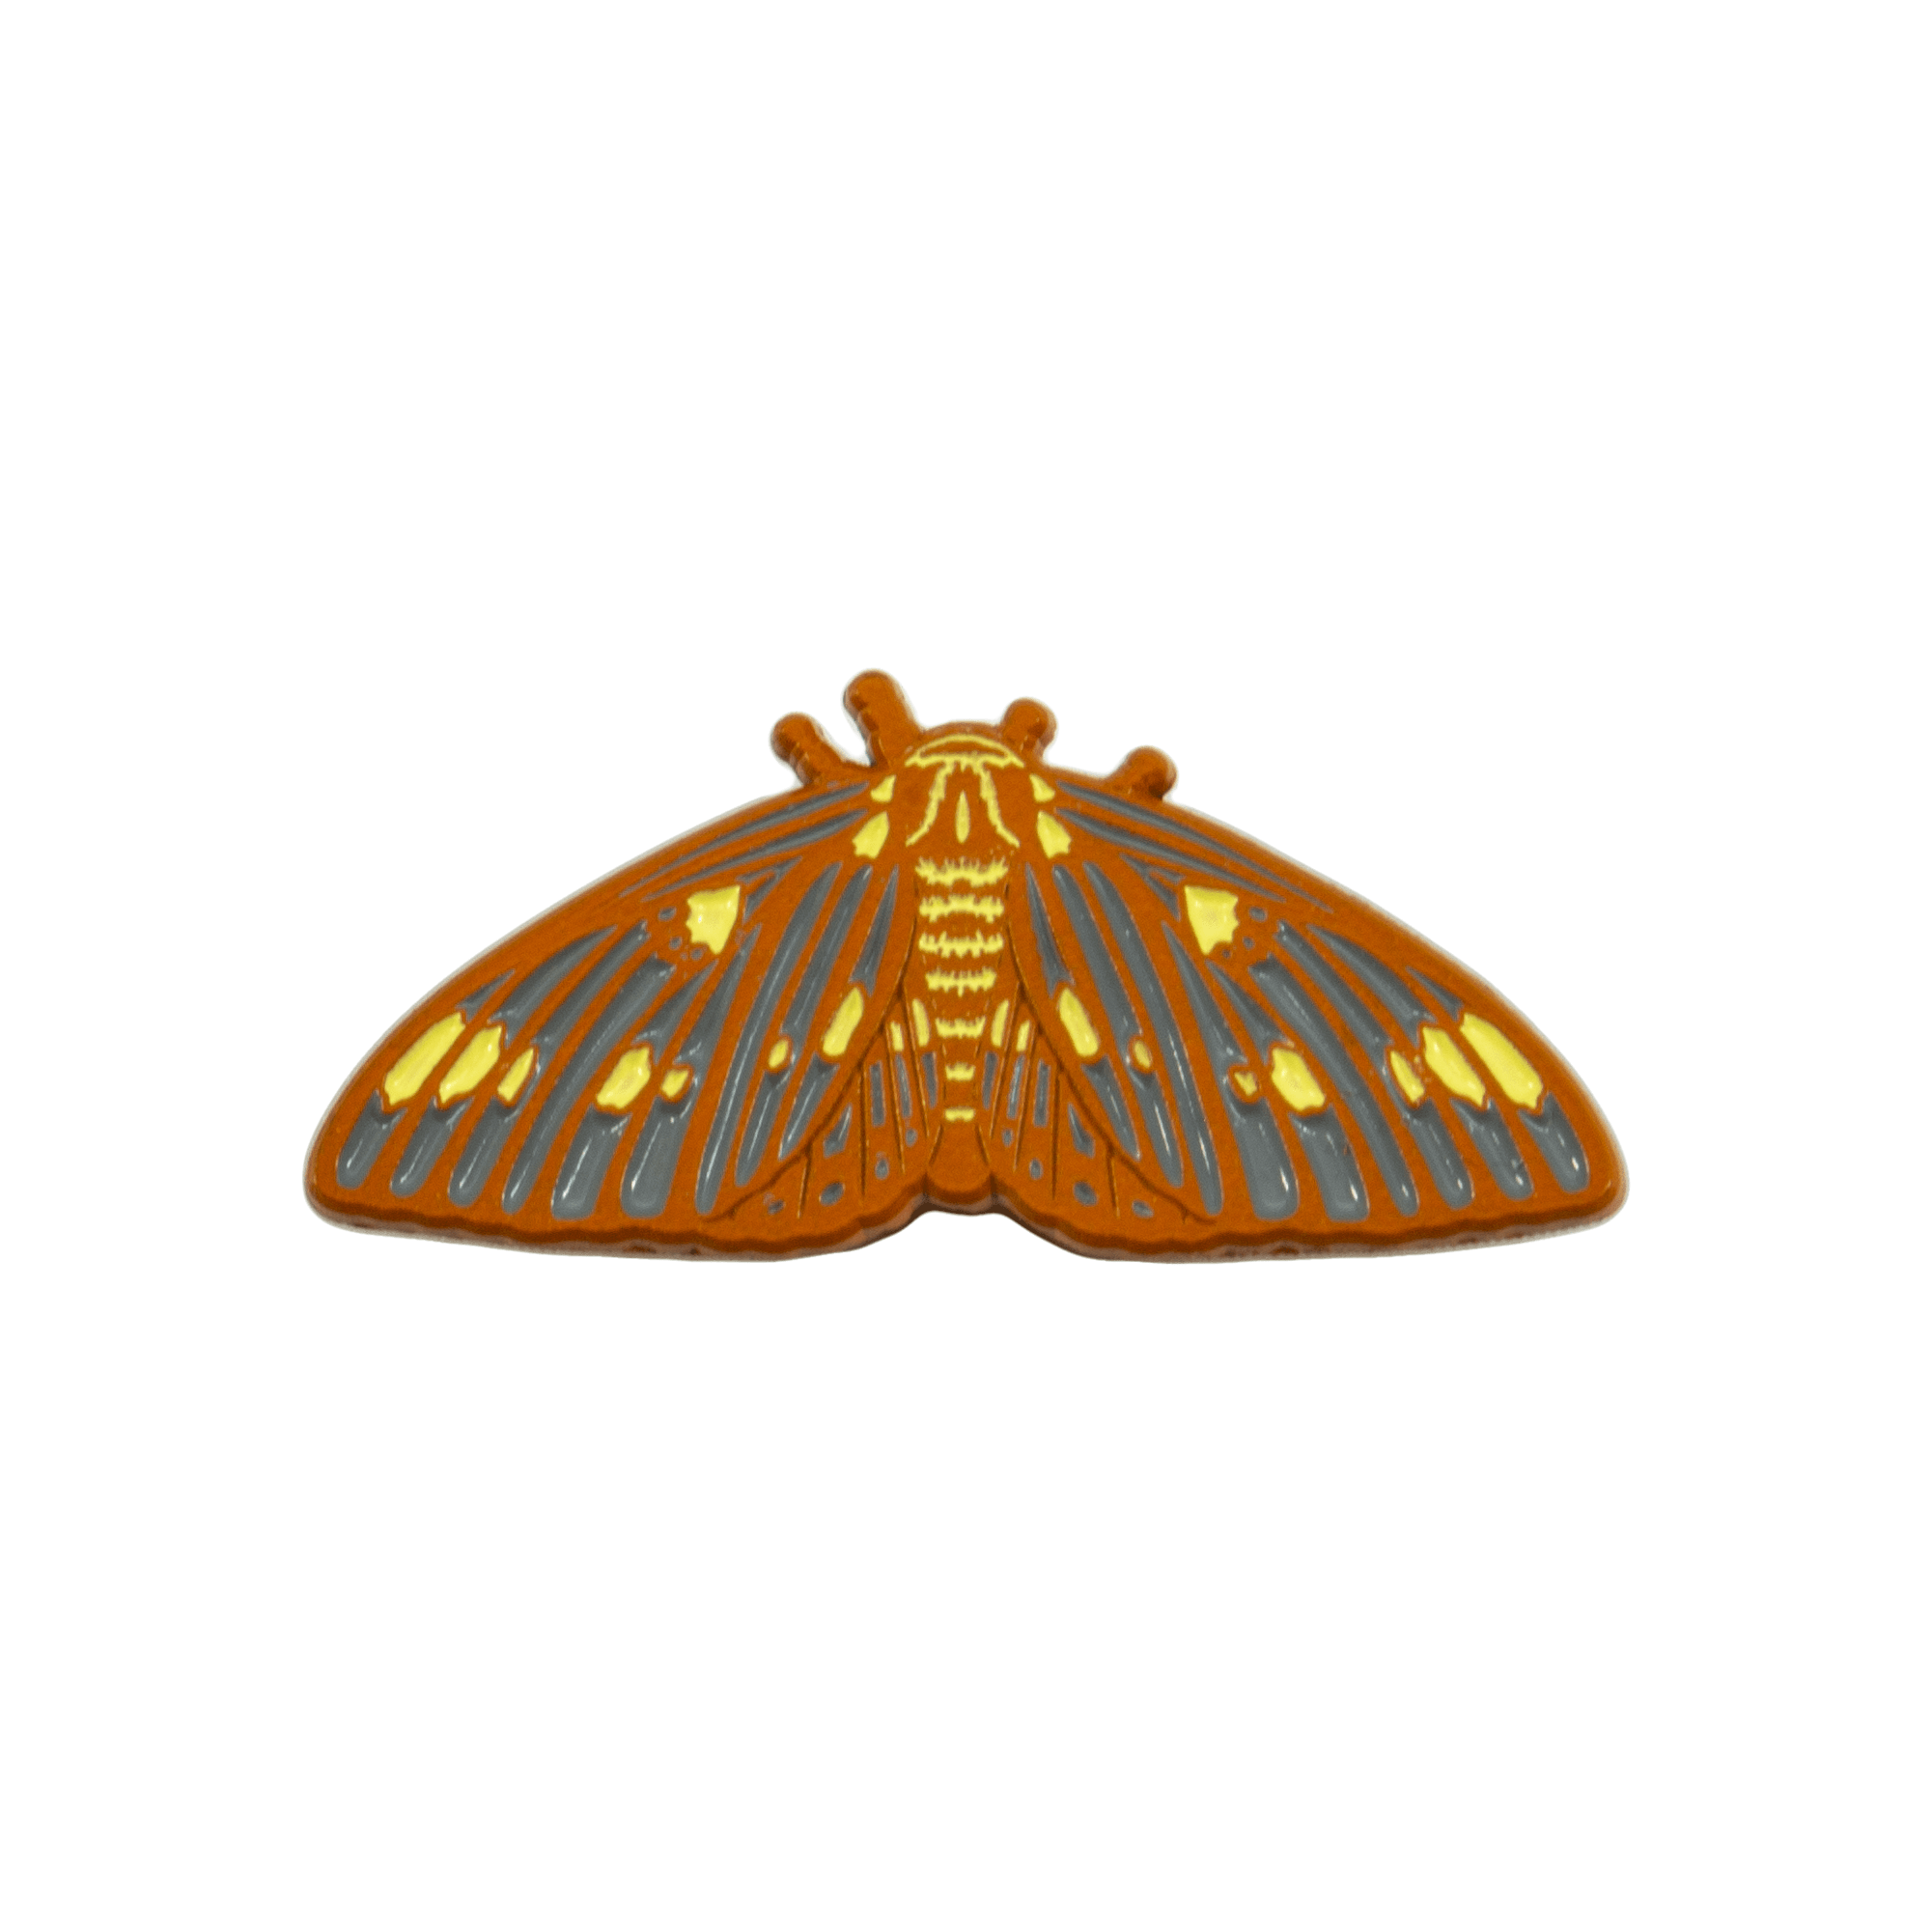 A brightly colored, orange, yellow, and grey Citheronia Regalis (Regal moth, Royal Walnut Moth) enamel pin on a plain white background.